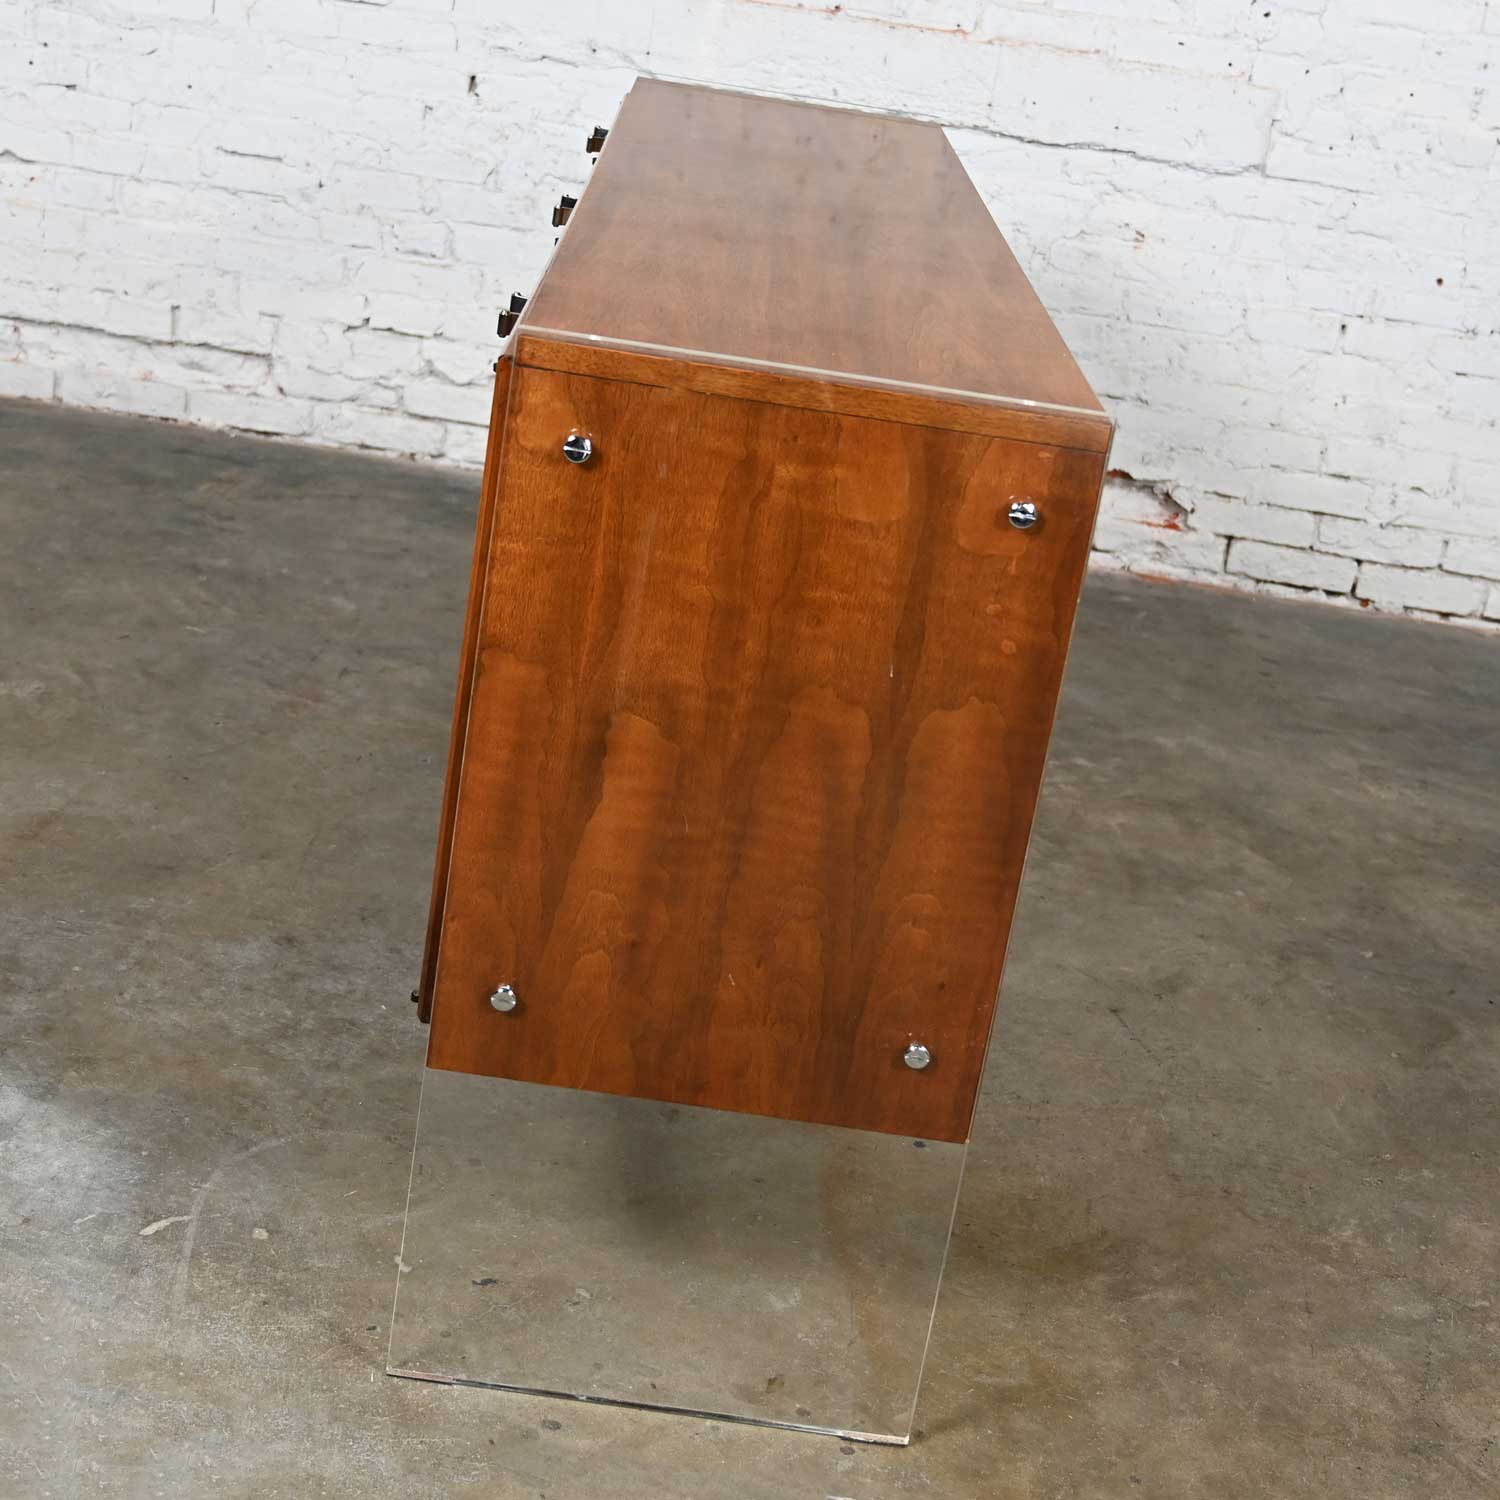 Vintage MCM to Modern Rosewood Buffet Credenza Lucite Legs & Chrome Accent Attributed to Bernhardt Flair